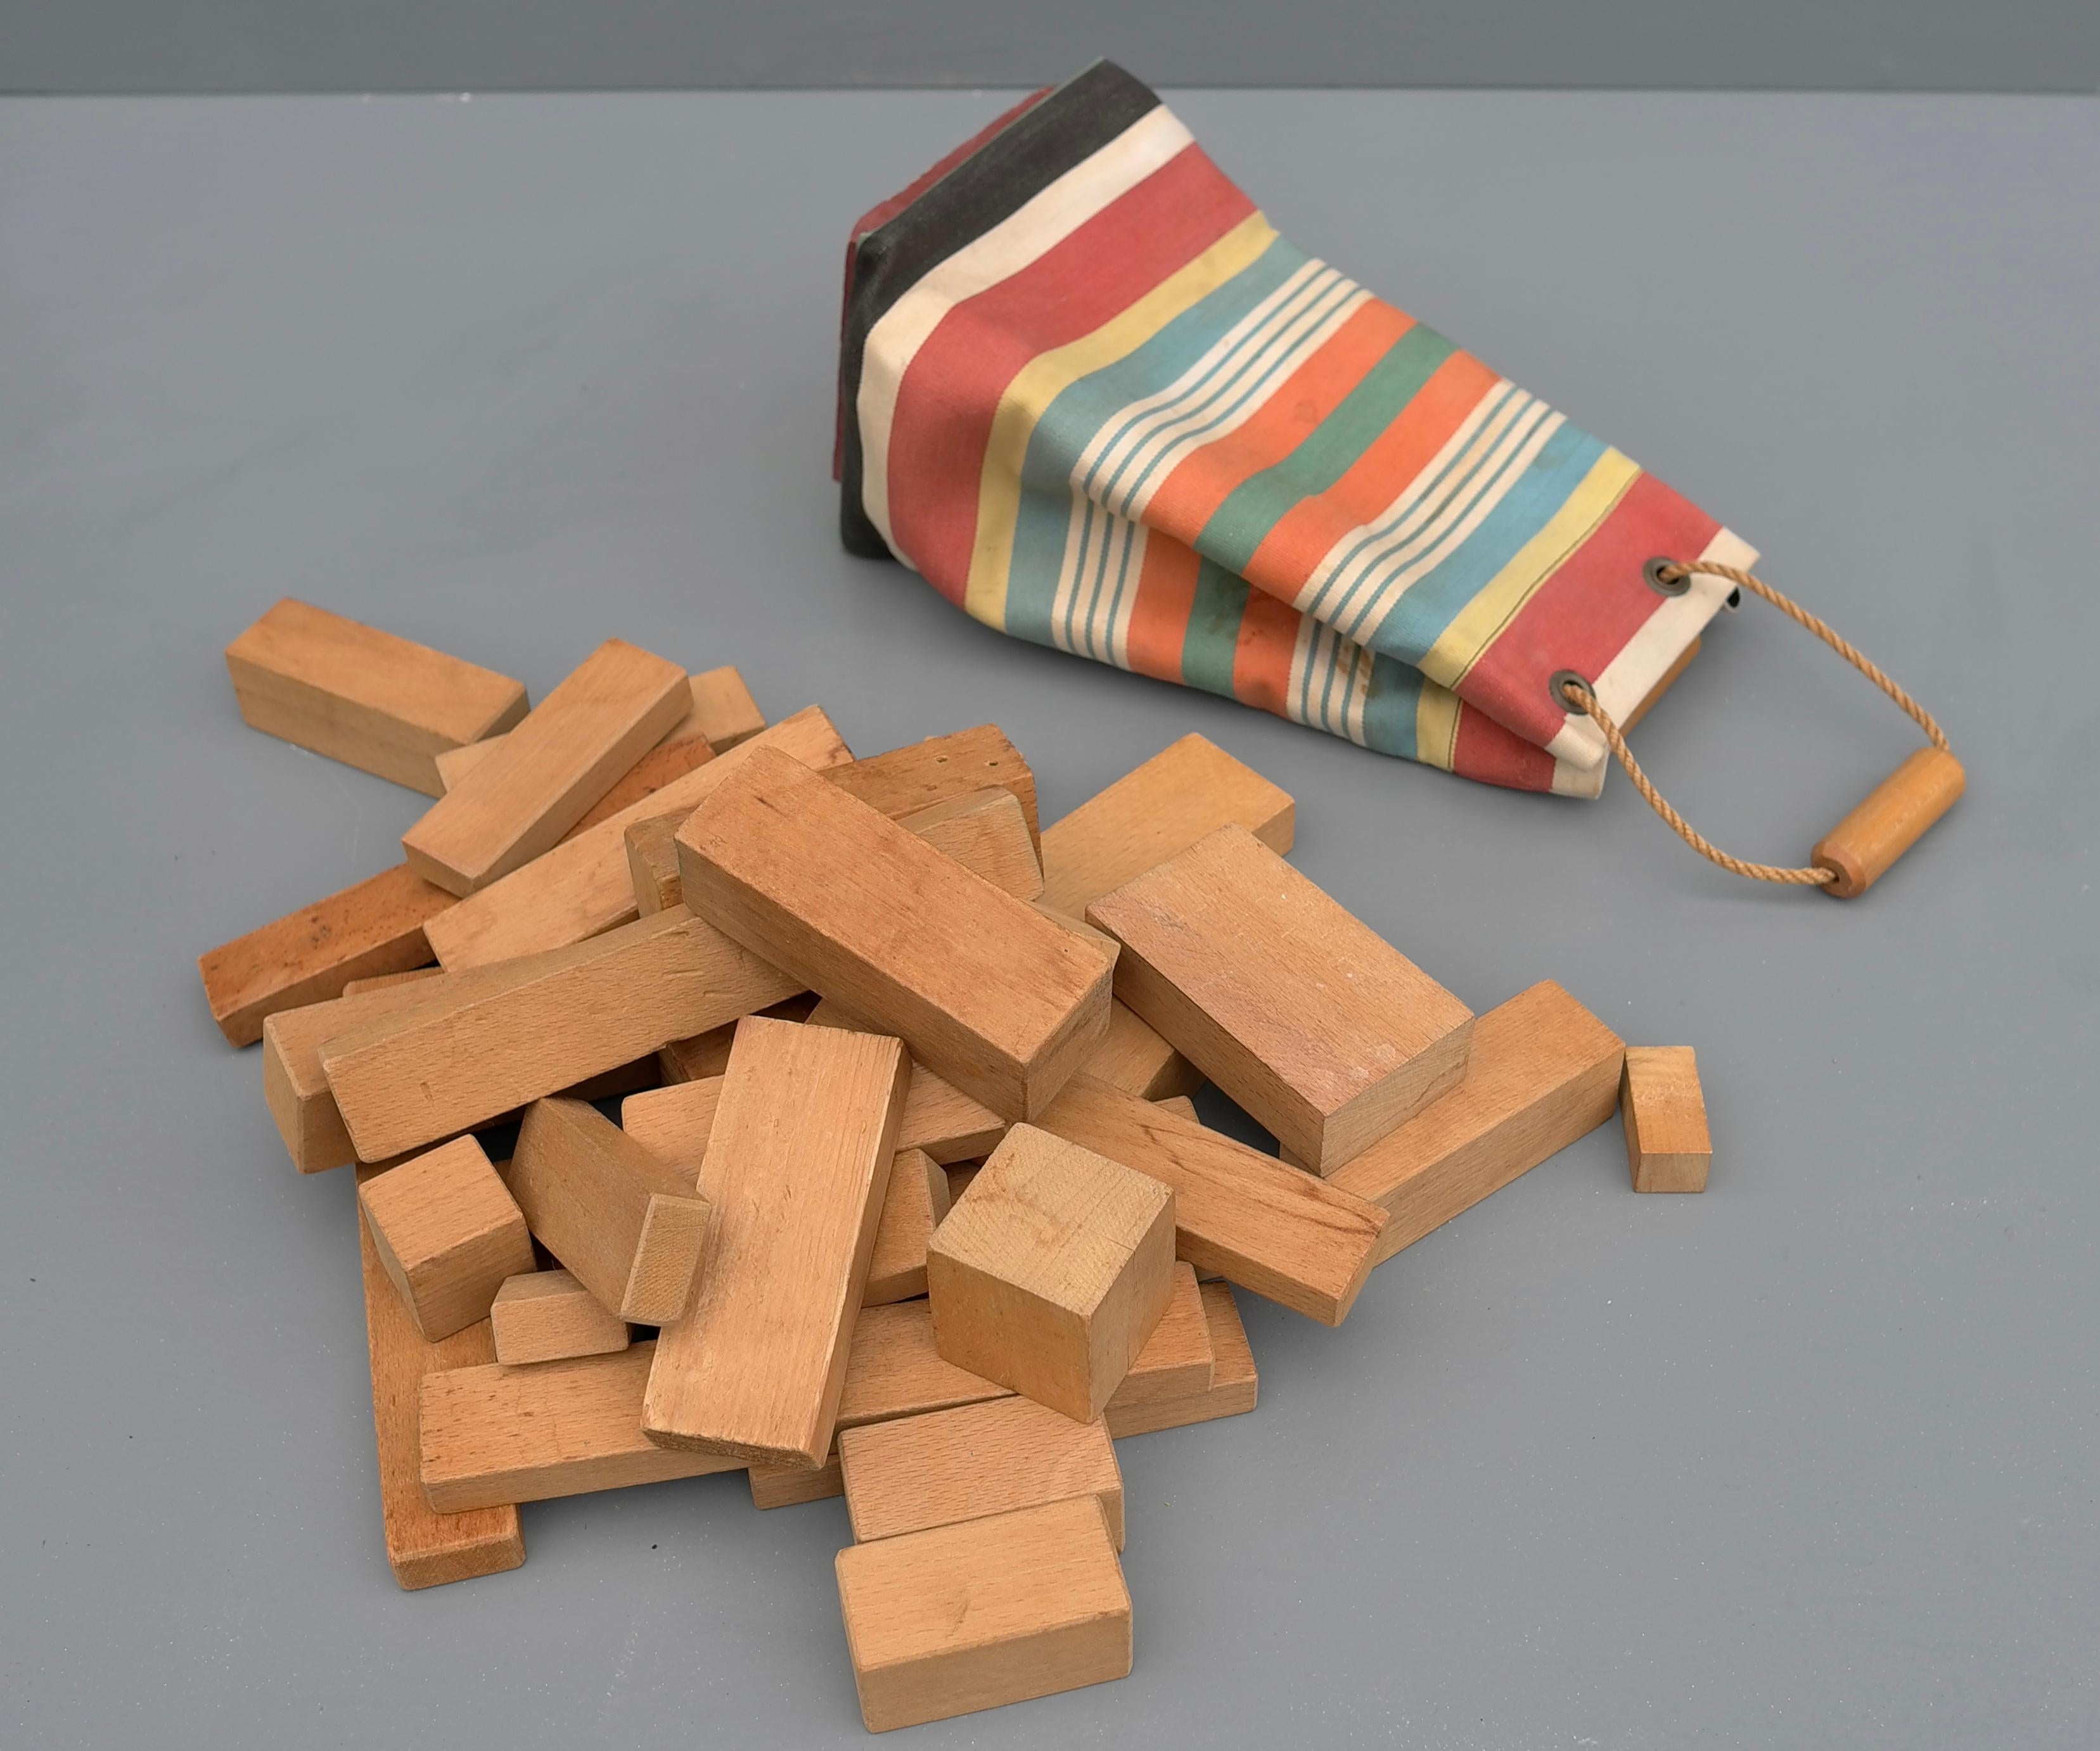 Ko Verzuu mid-century children toy blocks, the Netherlands, 1950's

Lovely patinated wooden blocks in different shapes and sizes with a colorful striped canvas bag.